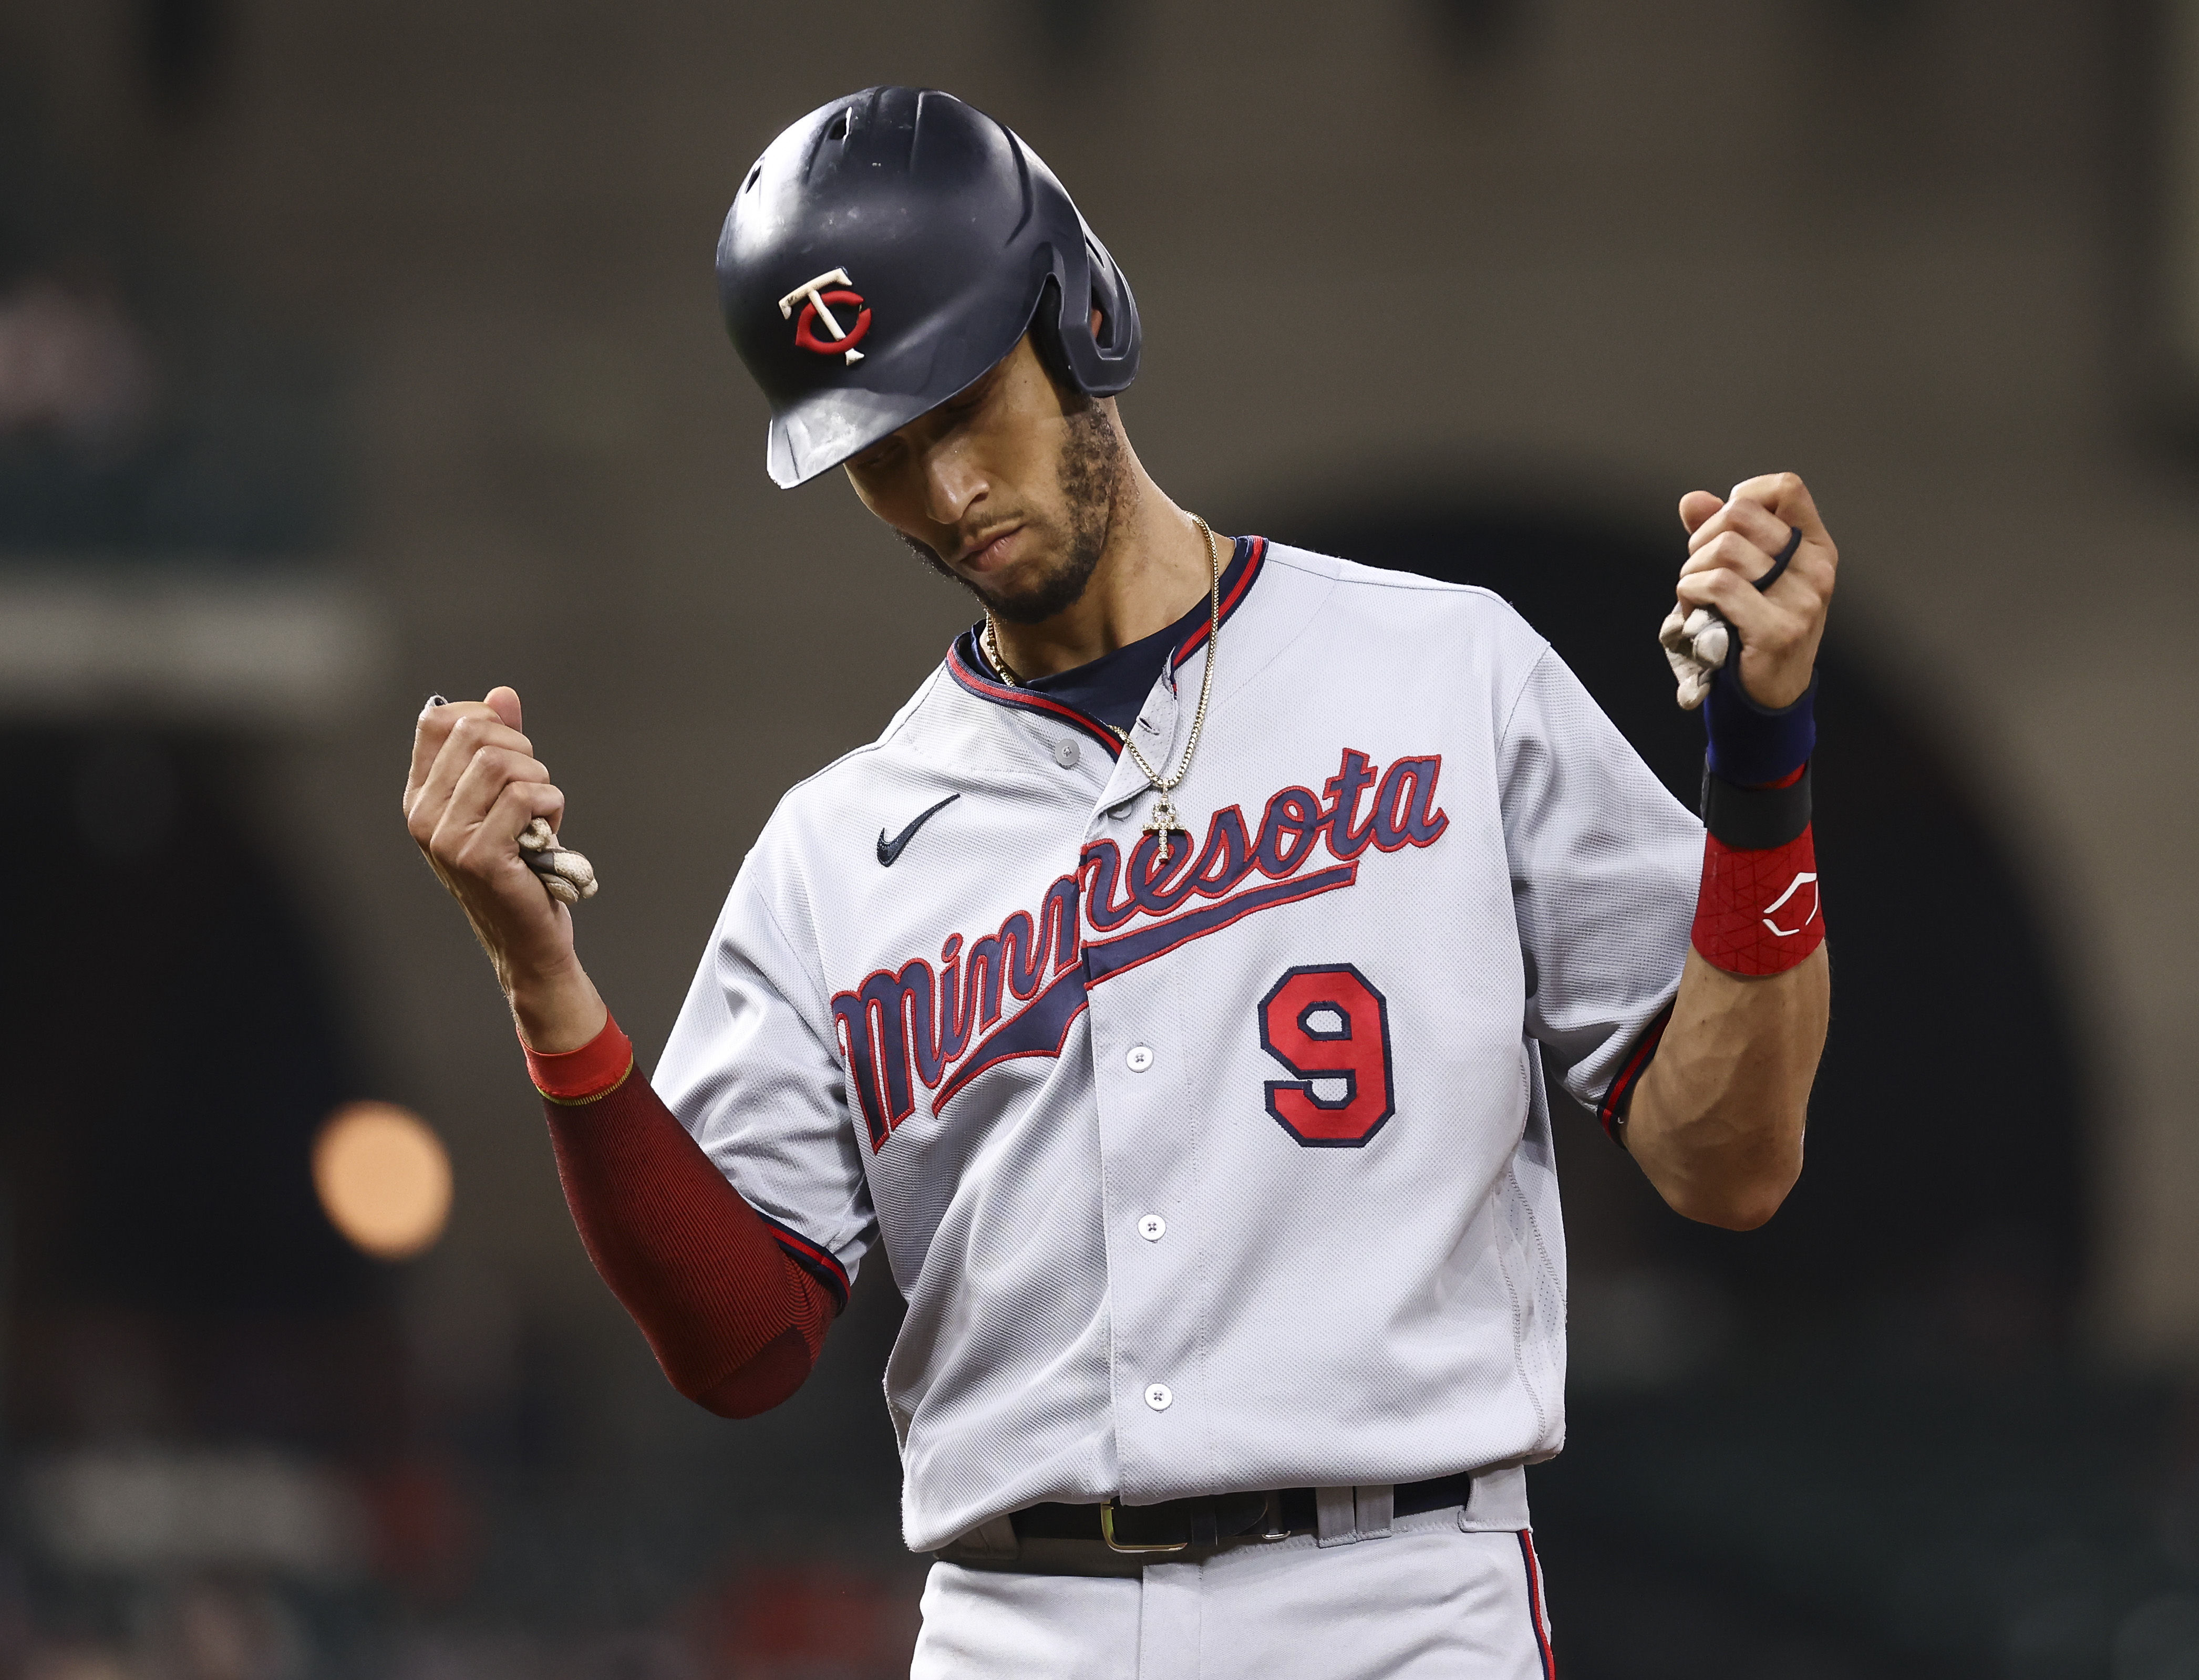 Minnesota Twins vs. Chicago White Sox Prediction: Can The Twins